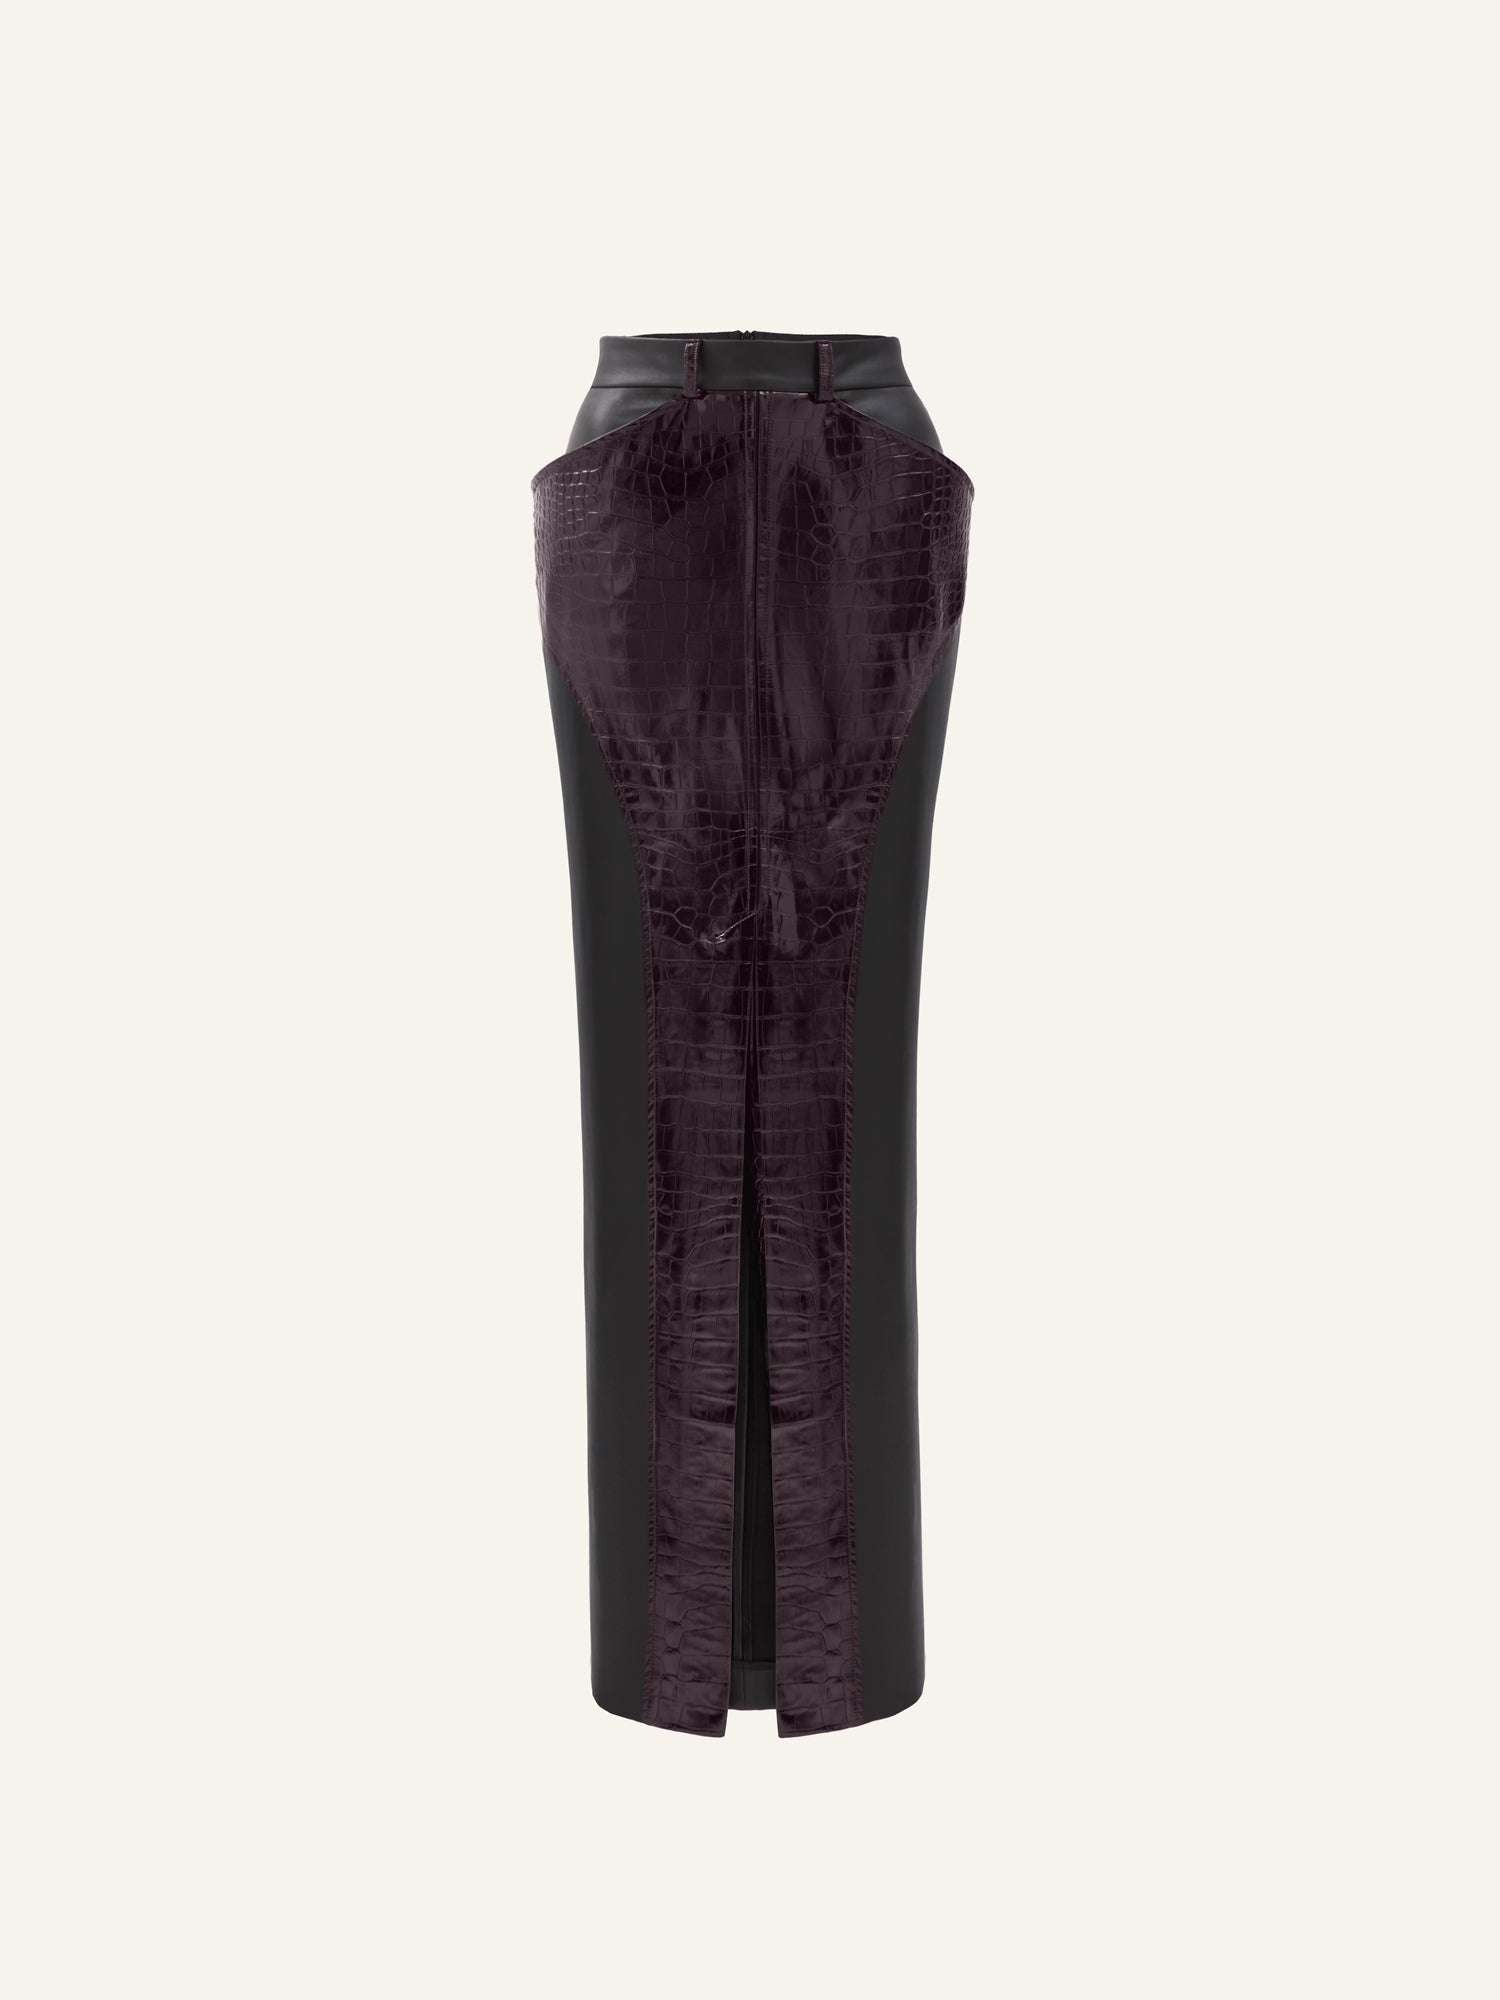 Product photo of a black vegan leather maxi skirt with a plum vegan crocodile printed leather insert with and high front slit